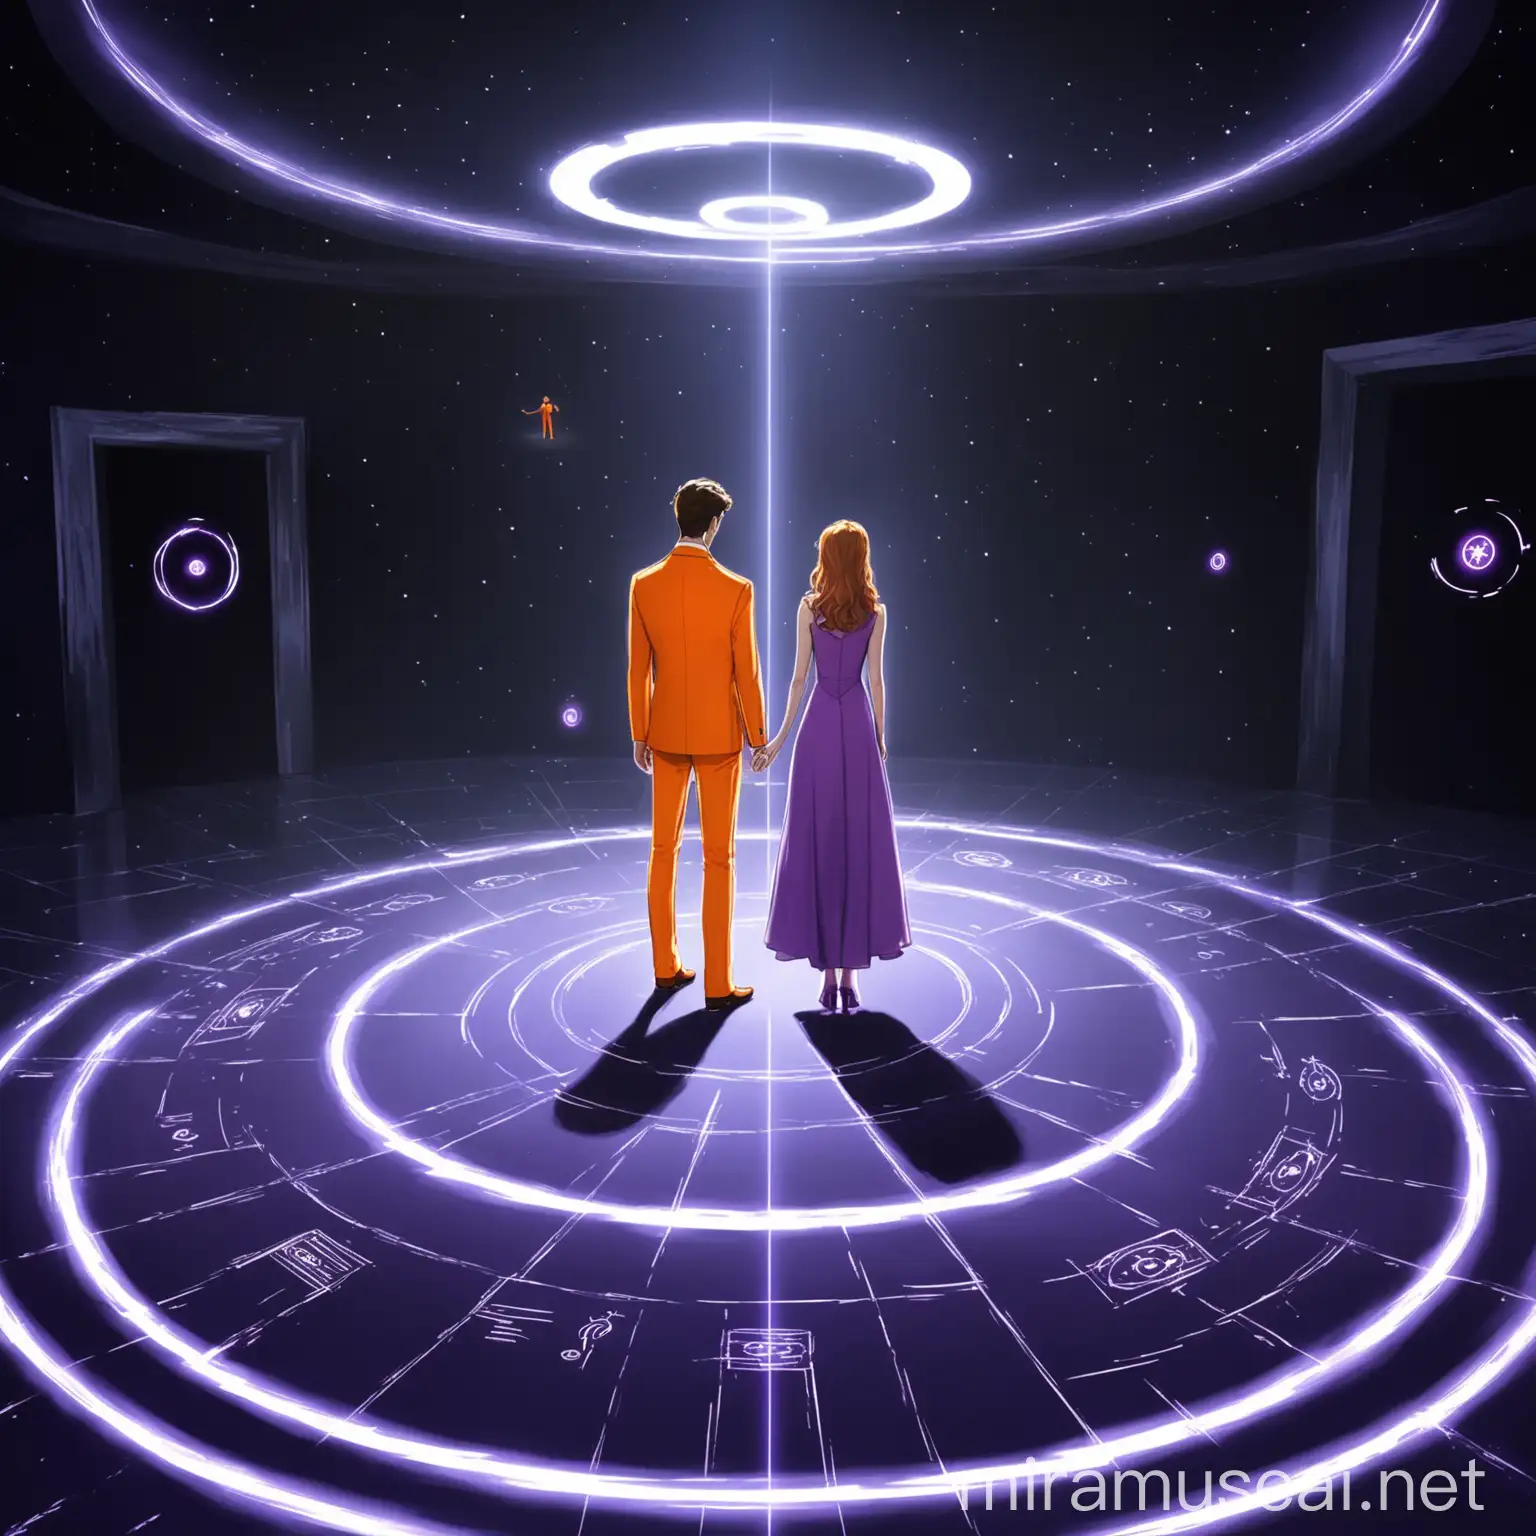 Young Couple in Orange and Purple Attire in Teleportation Chamber